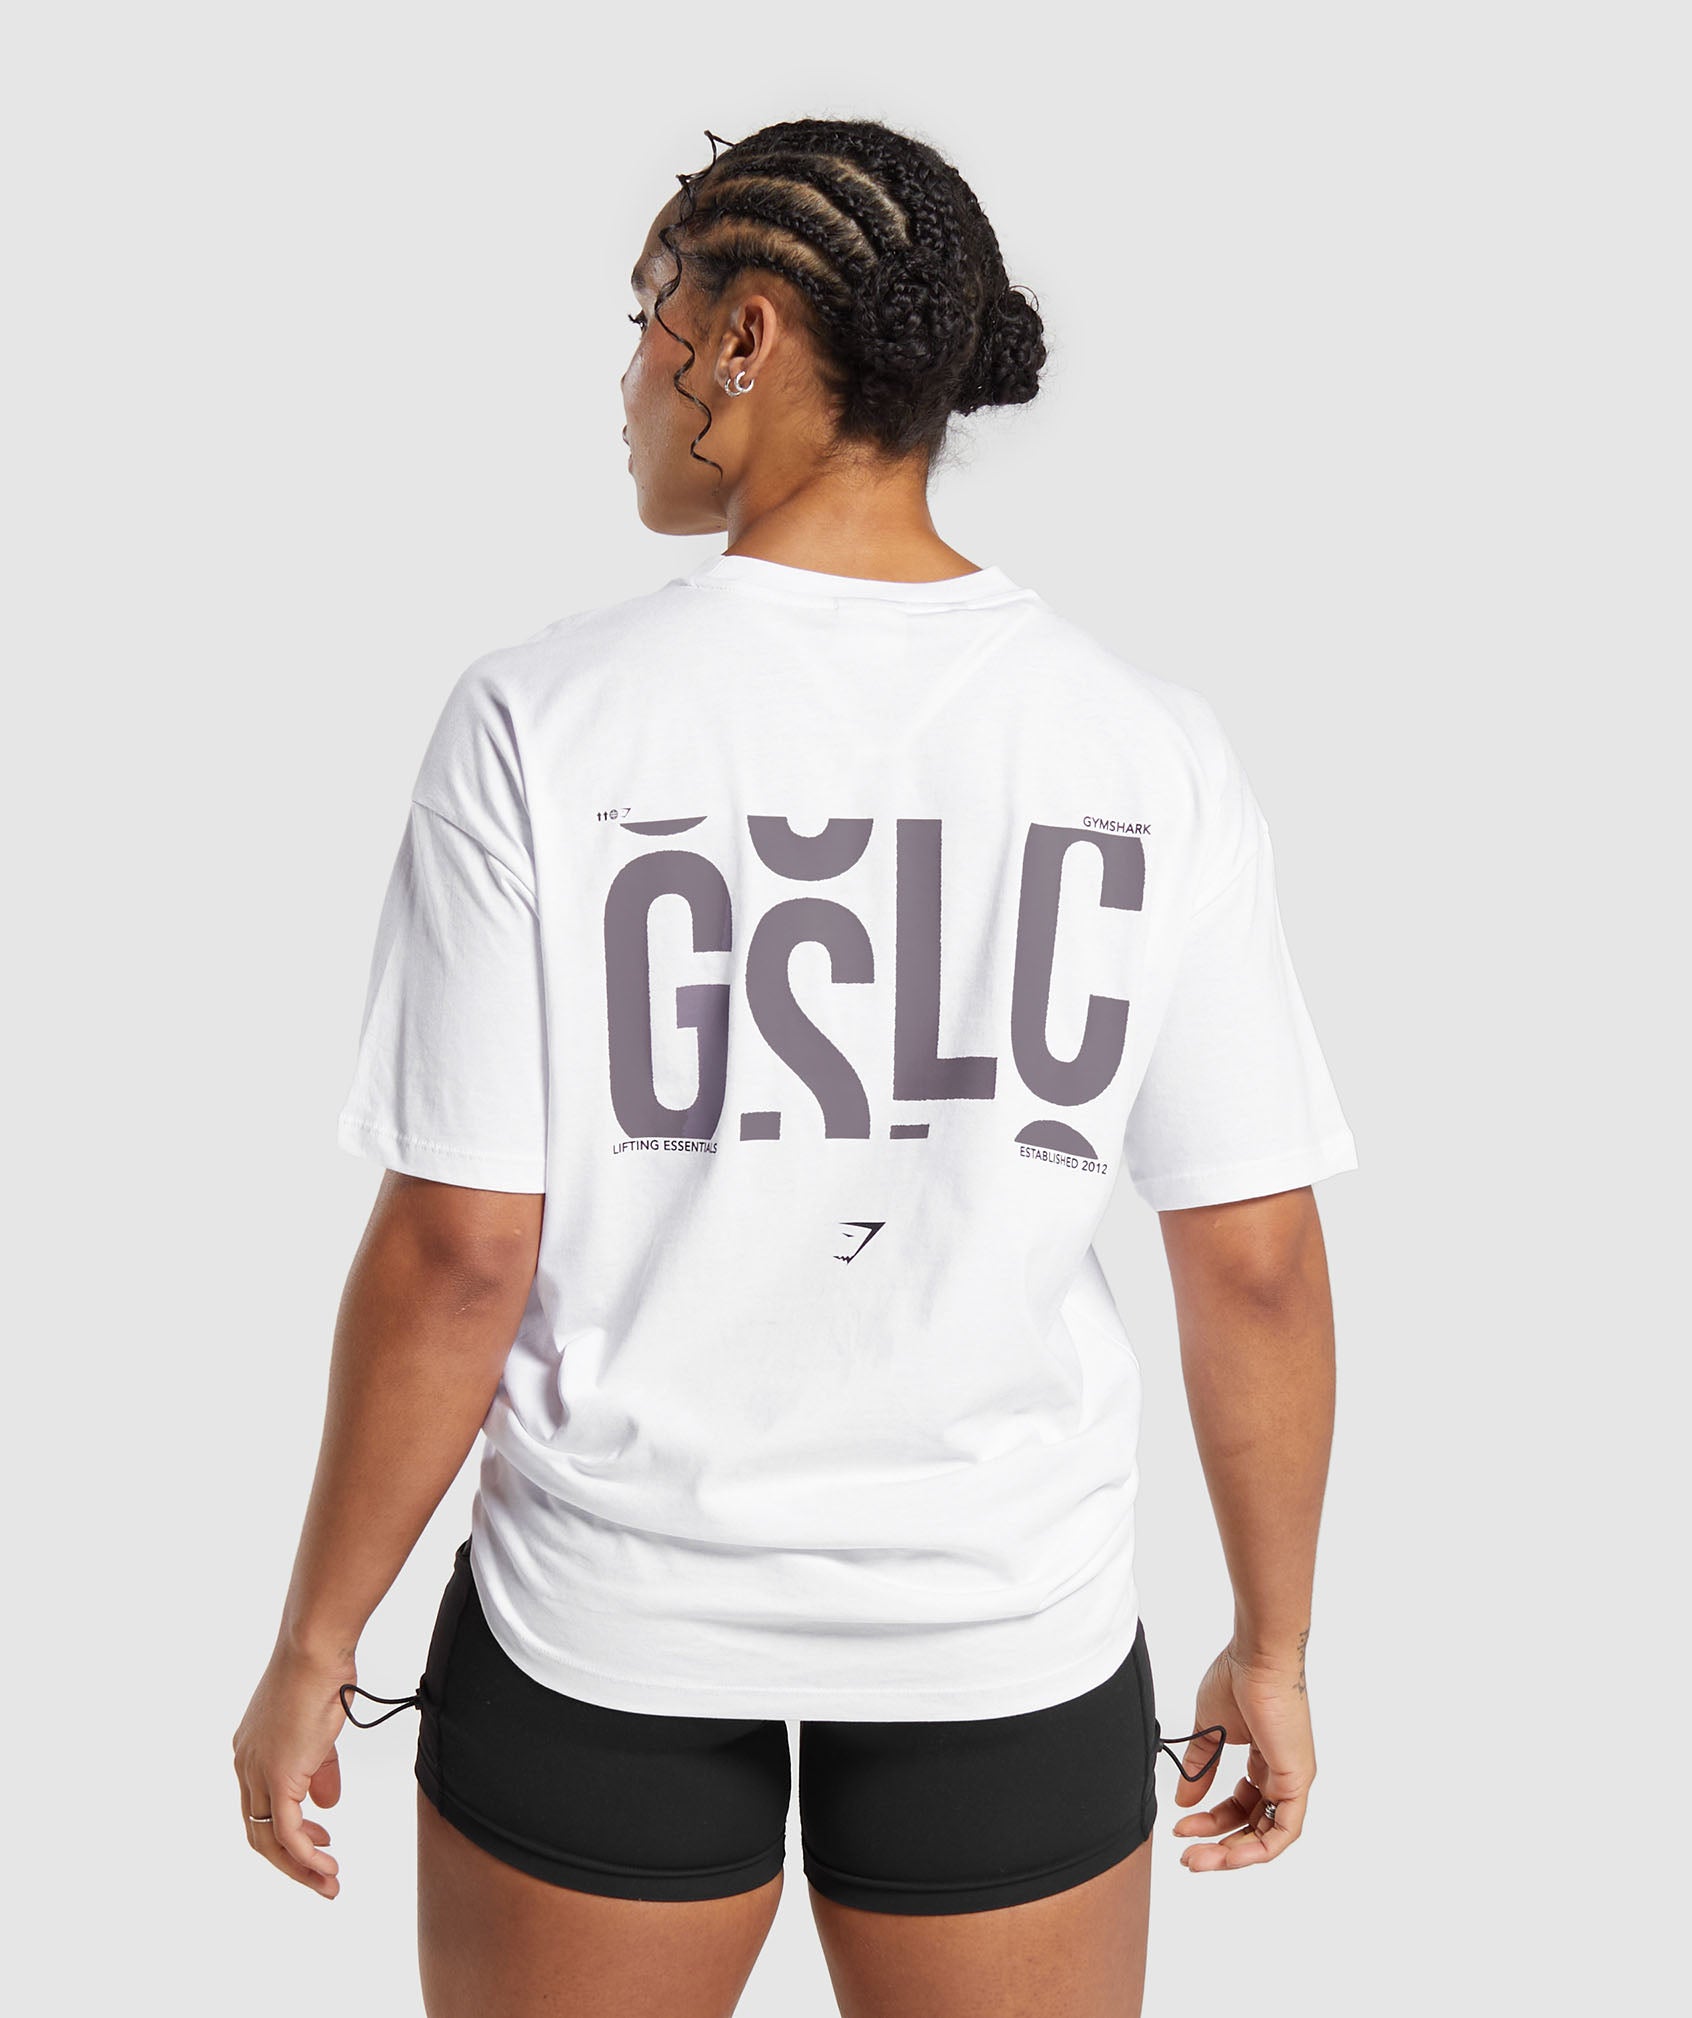 GSLC OS Tee in White - view 1